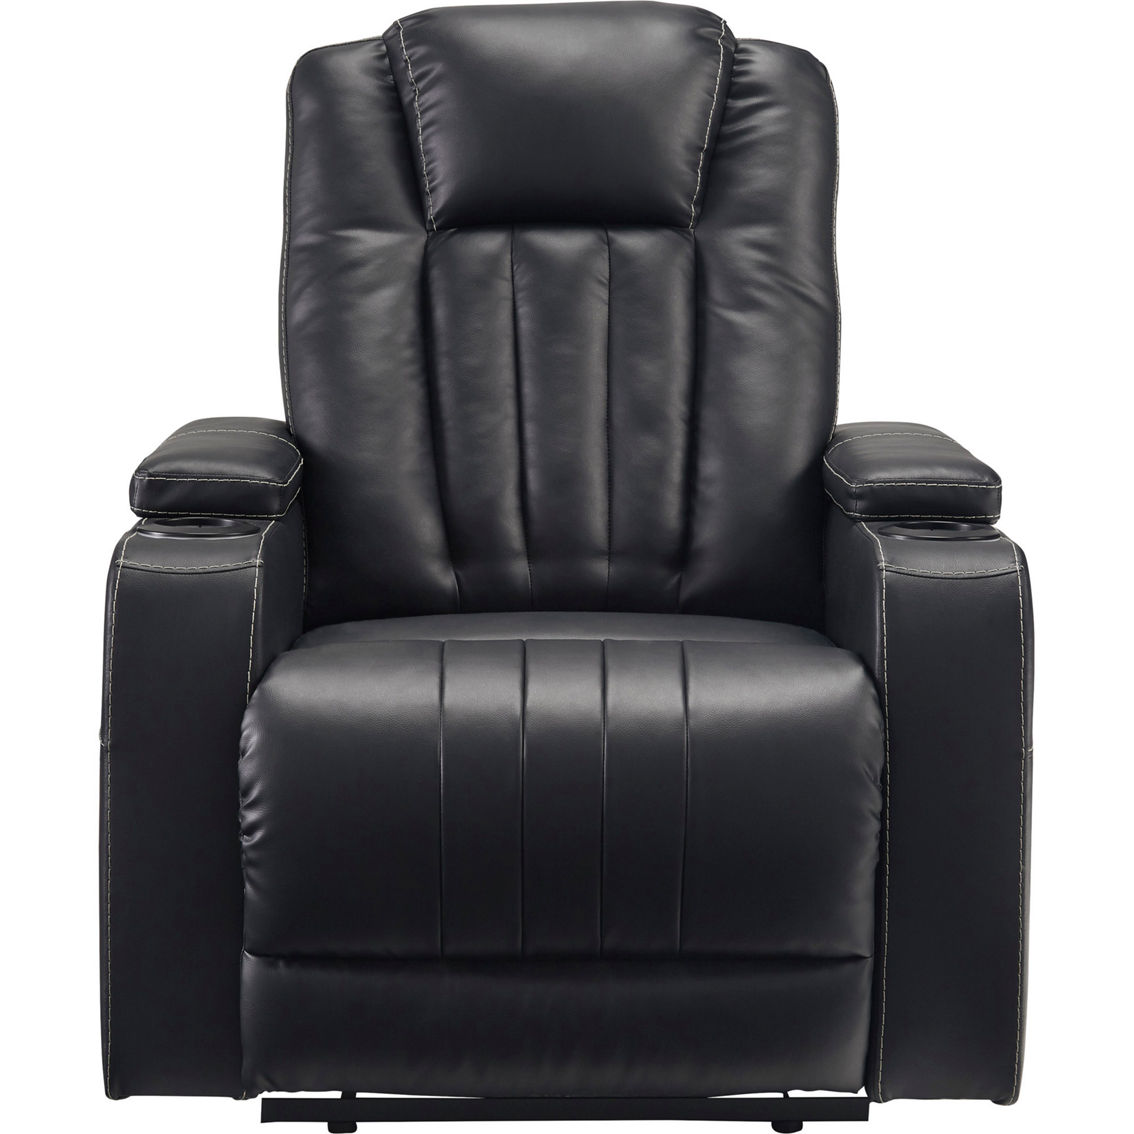 Signature Design by Ashley Center Point Recliner - Image 3 of 10